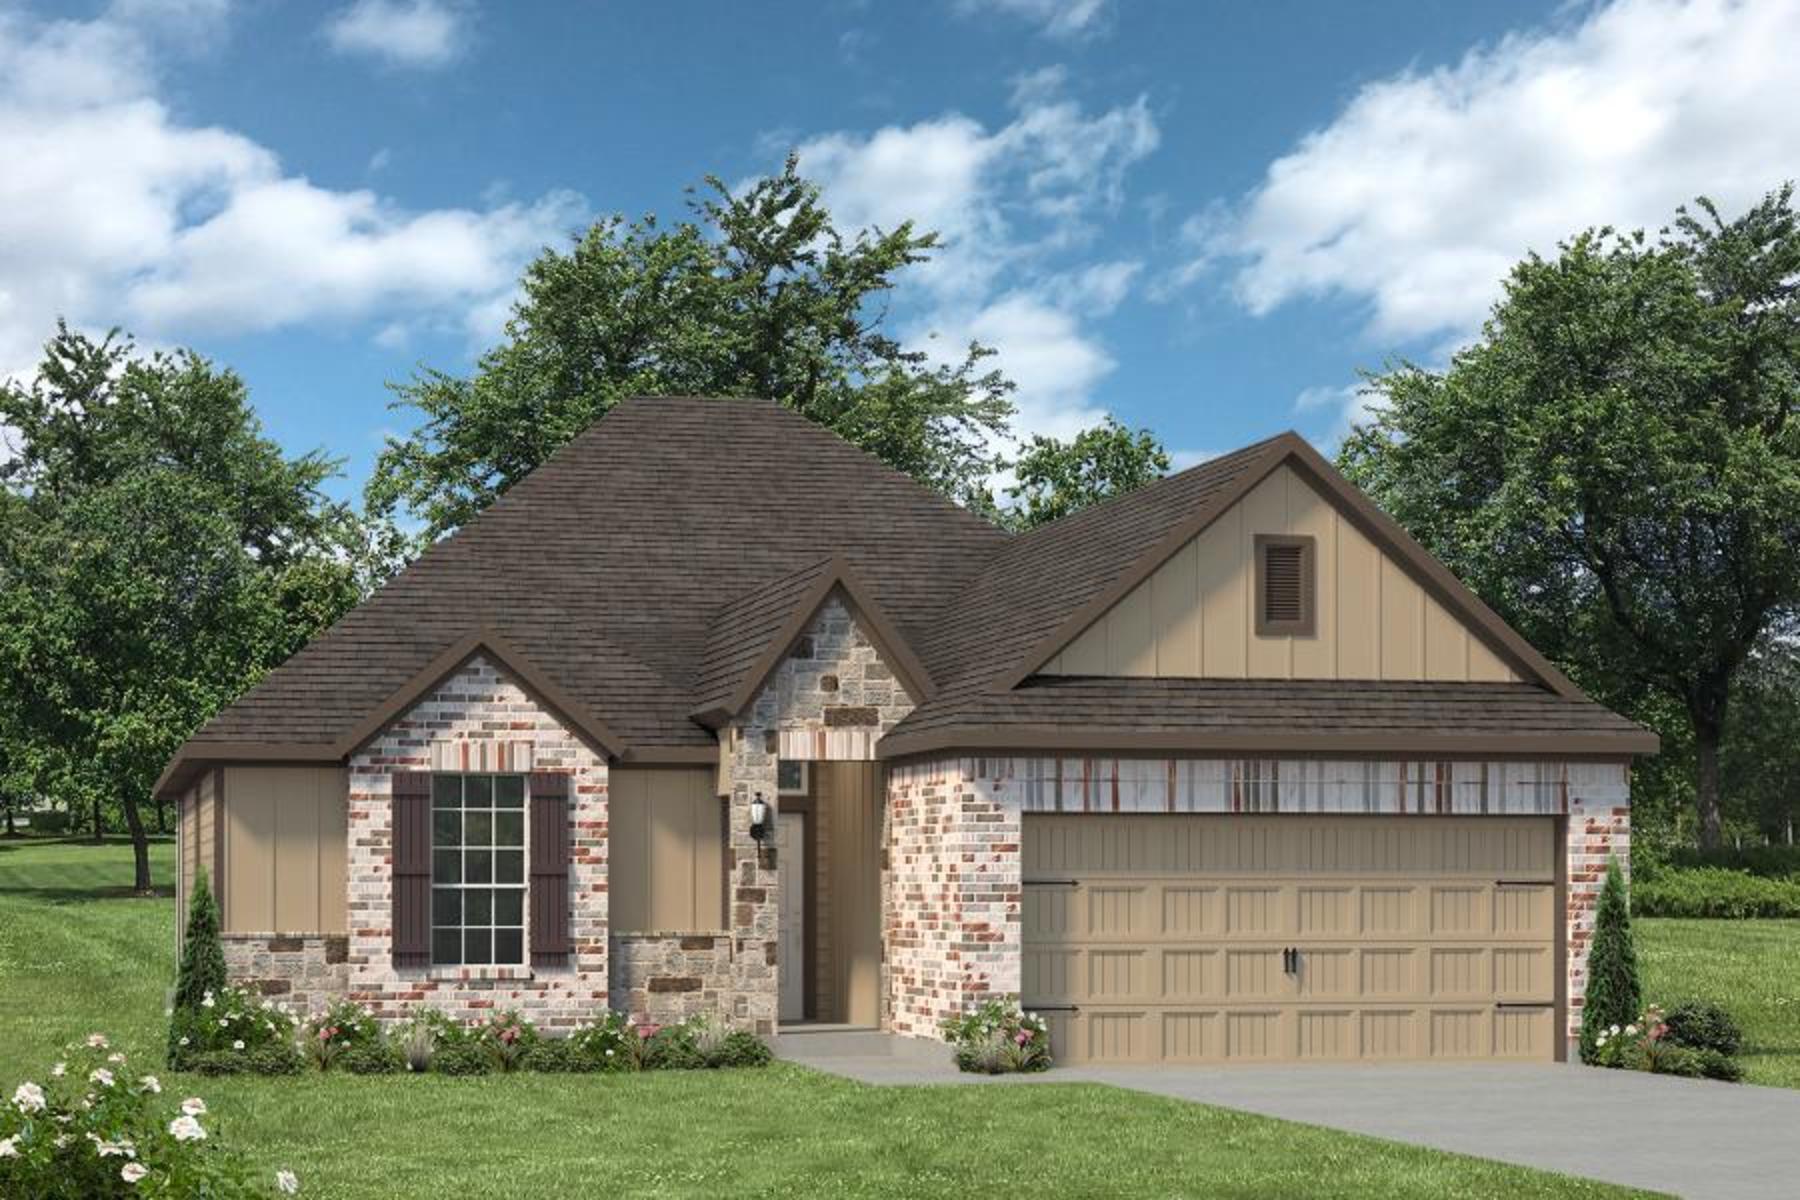 https://myhome.anewgo.com/client/stylecraft/community/Our%20Plans/plan/1651%20%7C%20Denton%20Classic?elevId=26. The 1651 New Home in Snook, TX